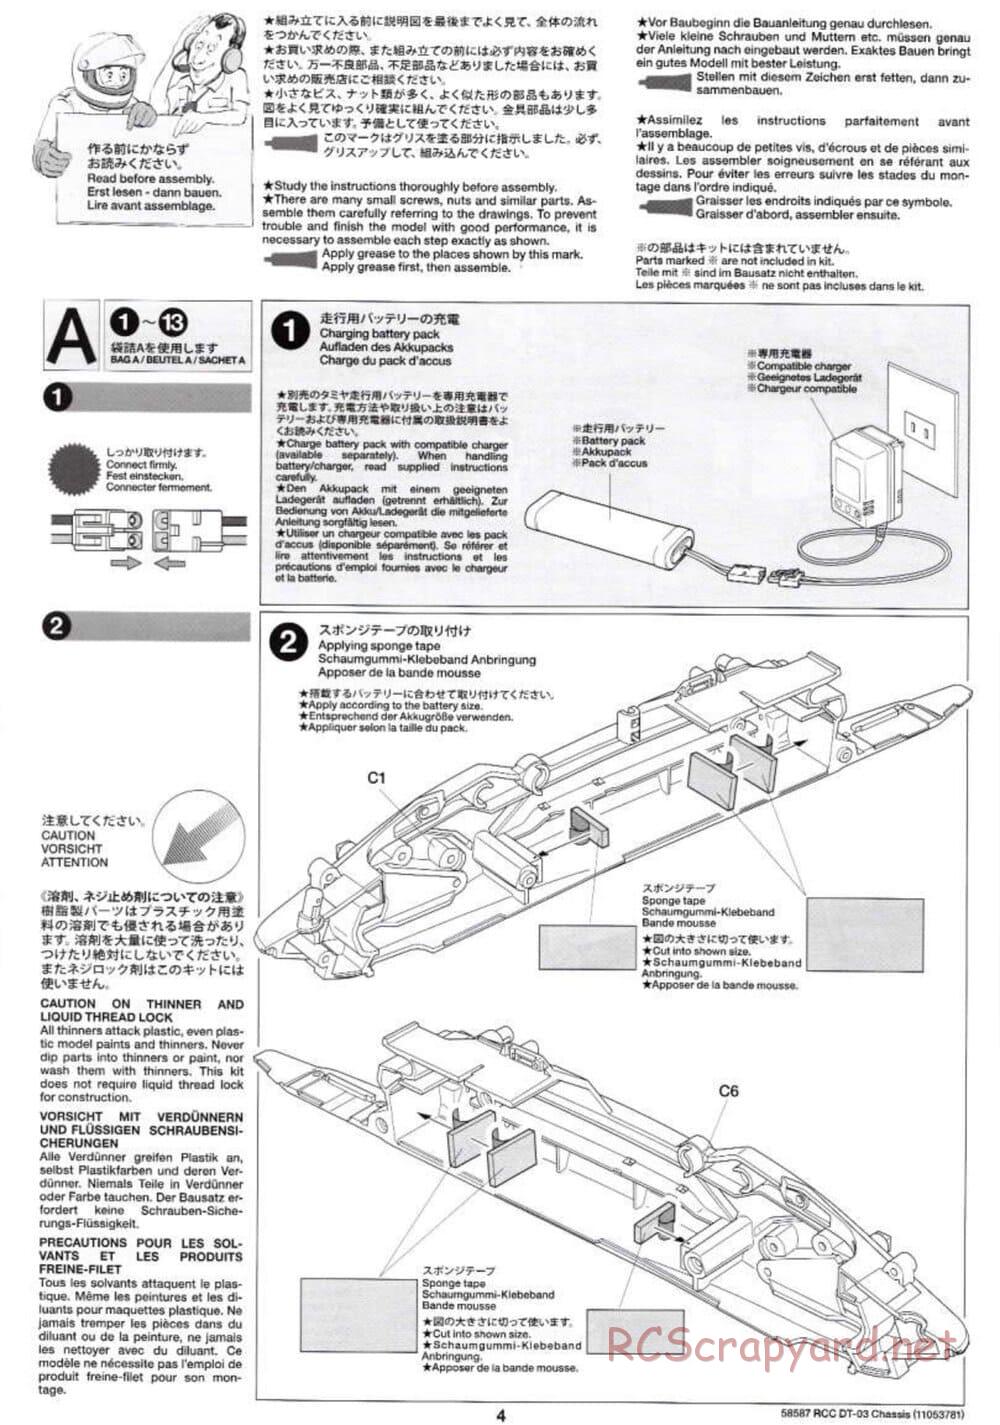 Tamiya - Neo Fighter Buggy Chassis - Manual - Page 4